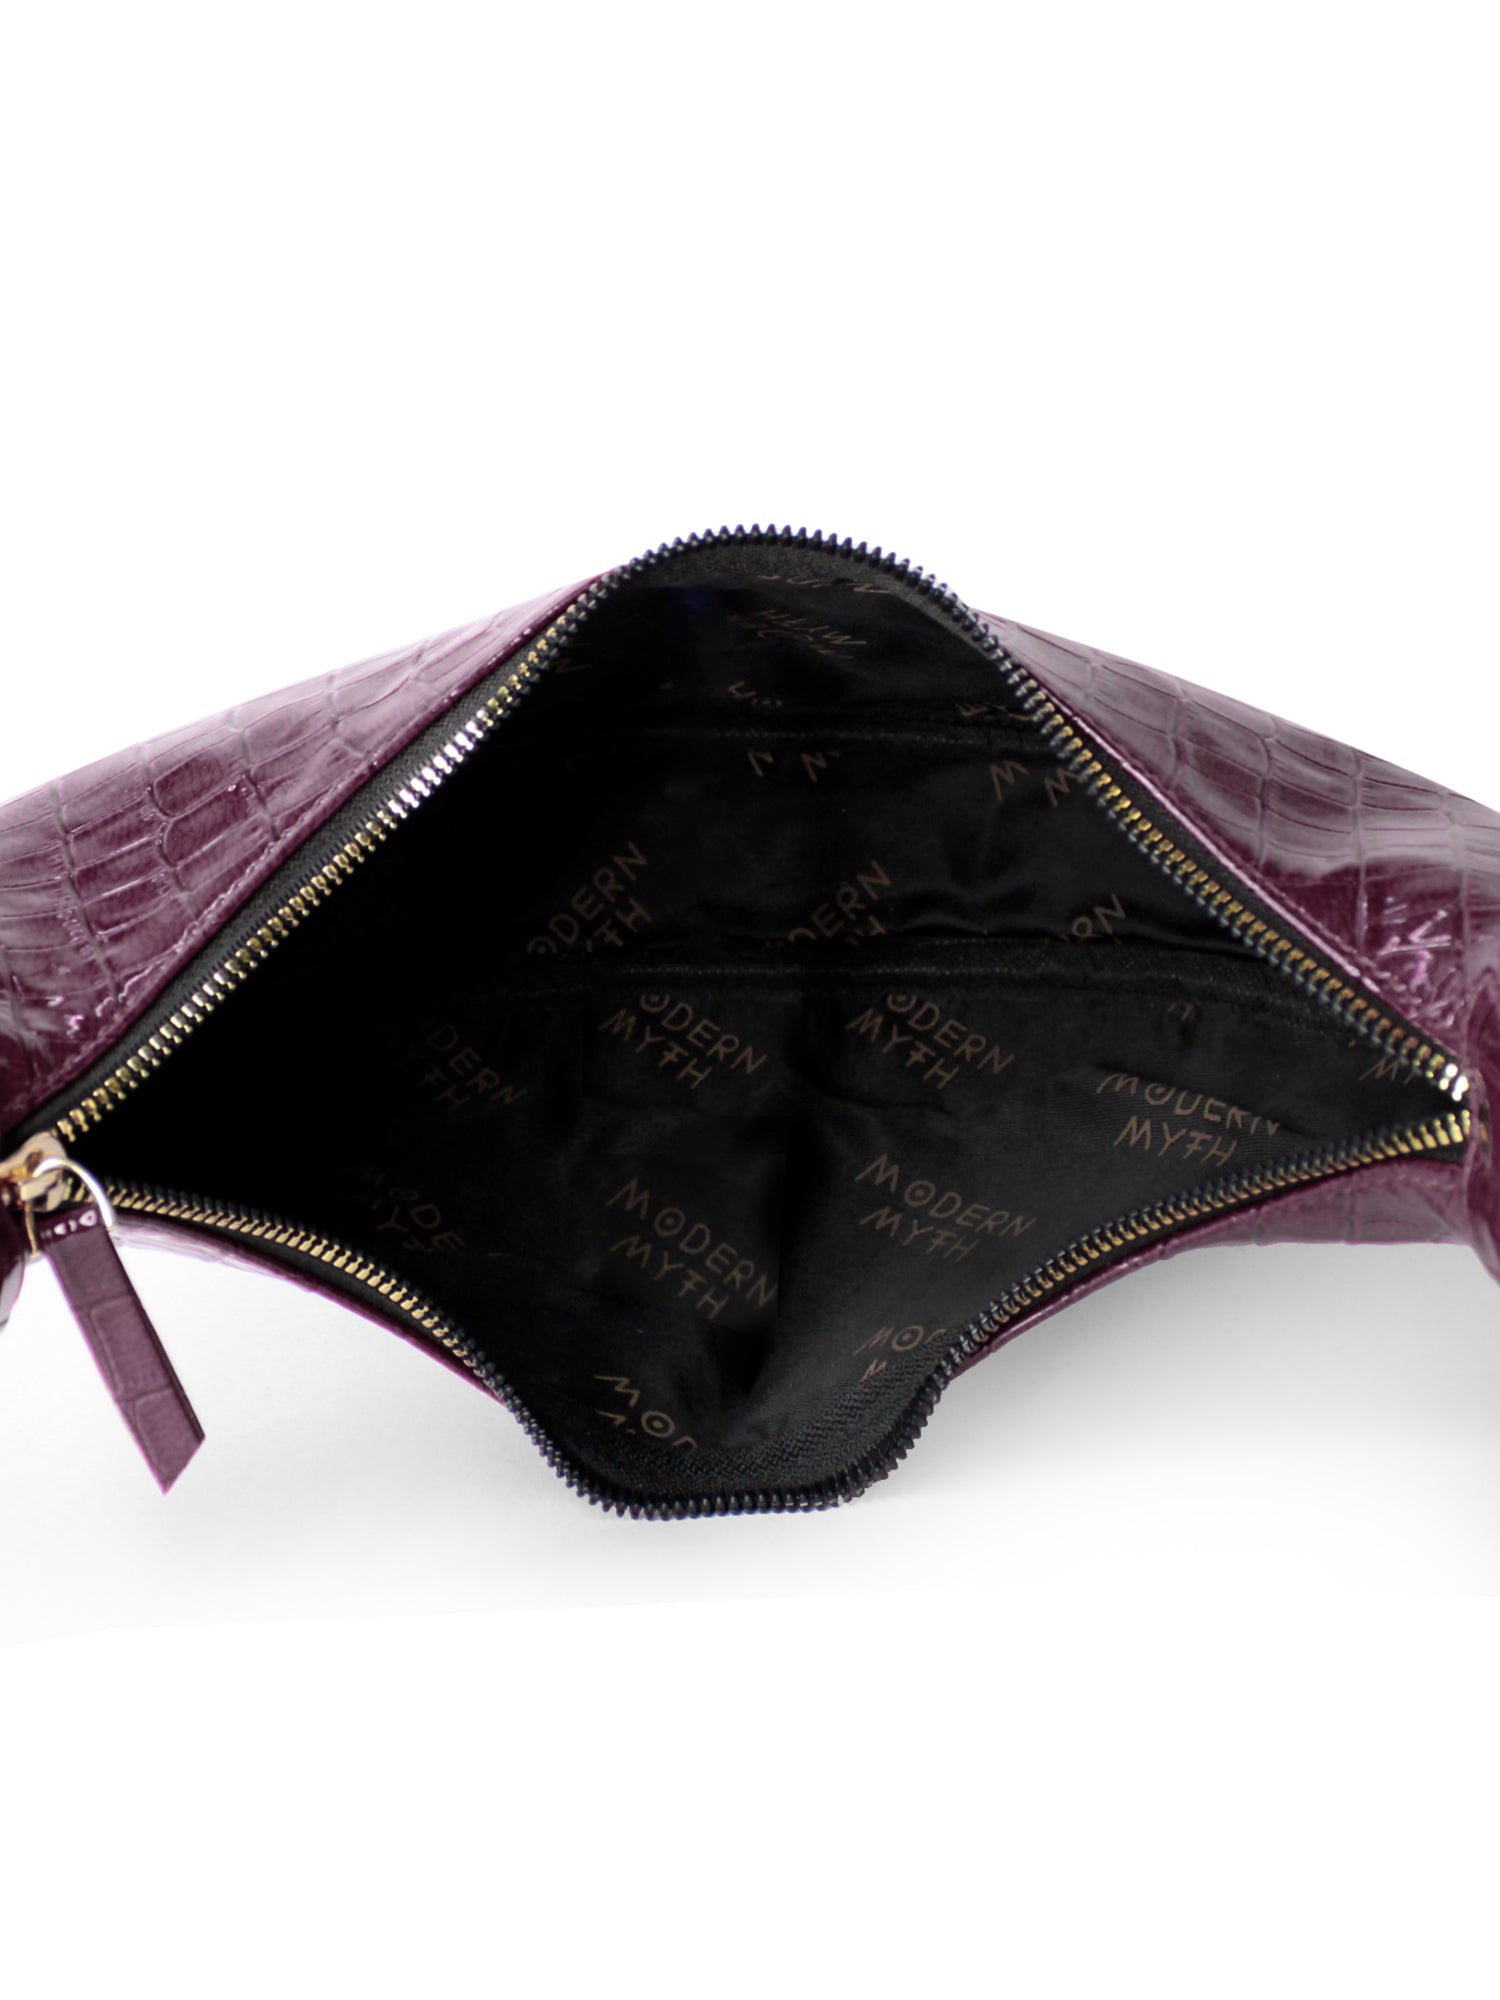 Purple Leather Designer Myer Evening Bags With Large Chain Strap Luxury  Evening Tote, Closure, Card Holder, And Underarm Purse For Women From  Fatcatbag, $112.96 | DHgate.Com